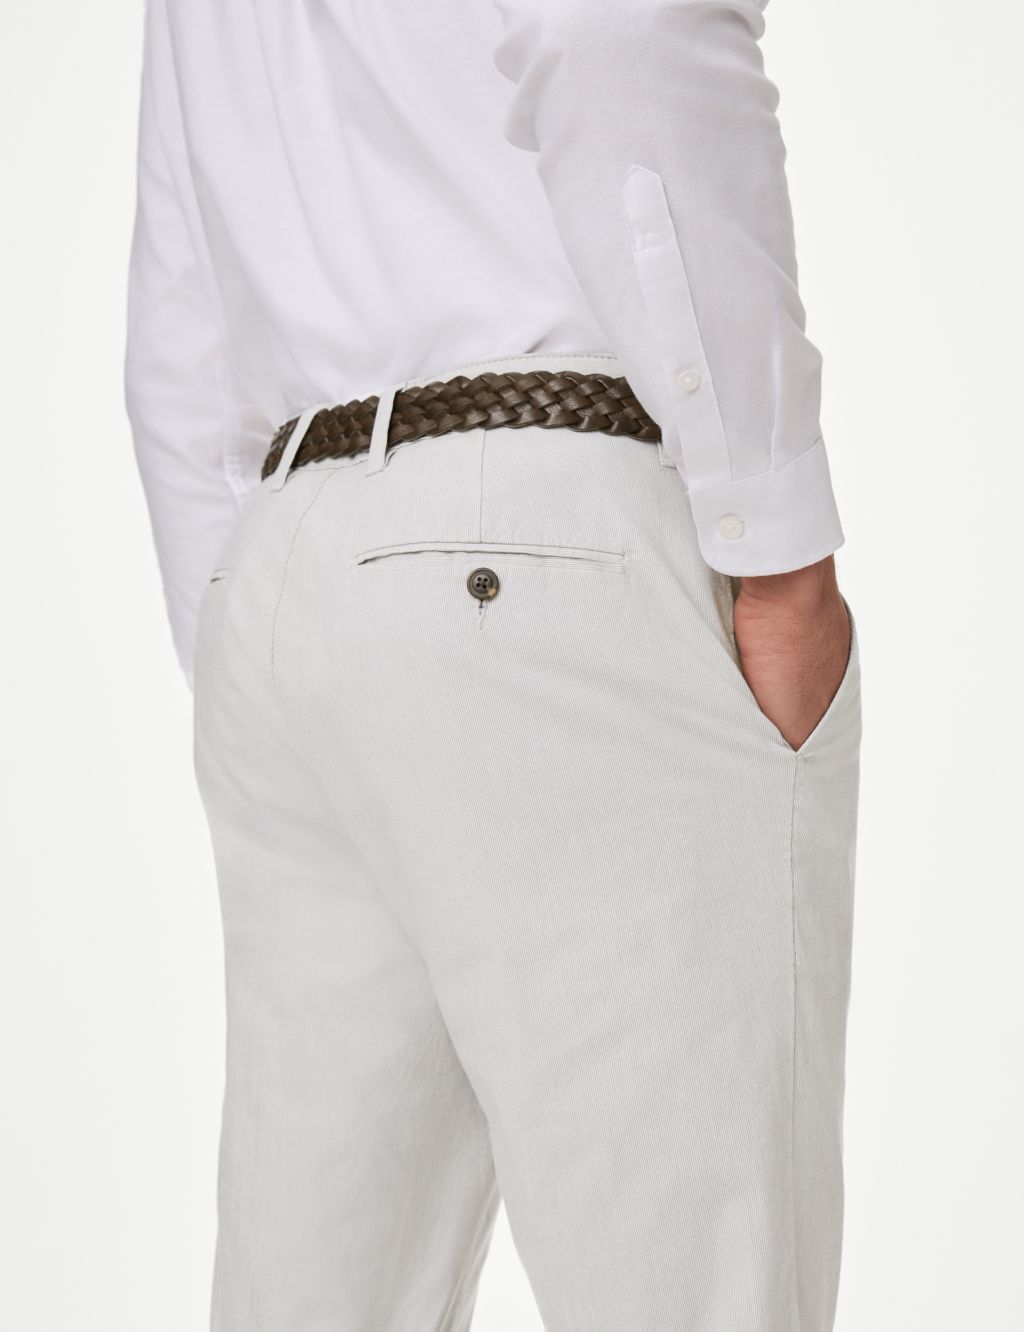 Slim Fit Textured Belted Chinos image 4